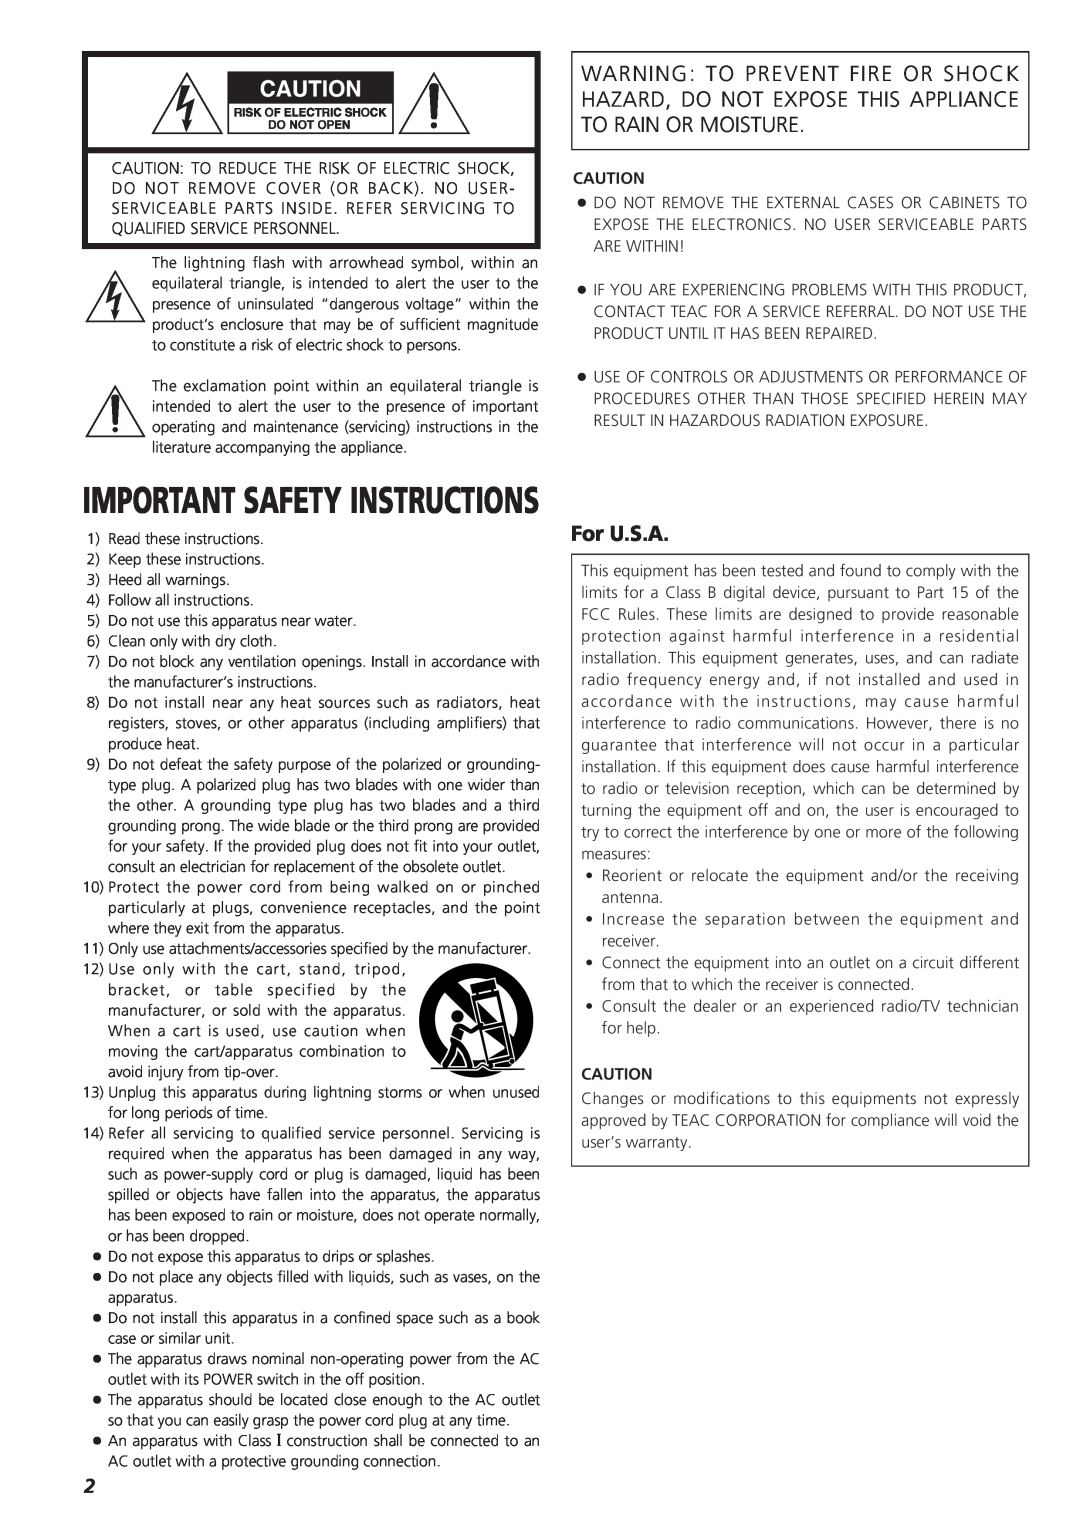 Esoteric X-03 owner manual For U.S.A, Important Safety Instructions 